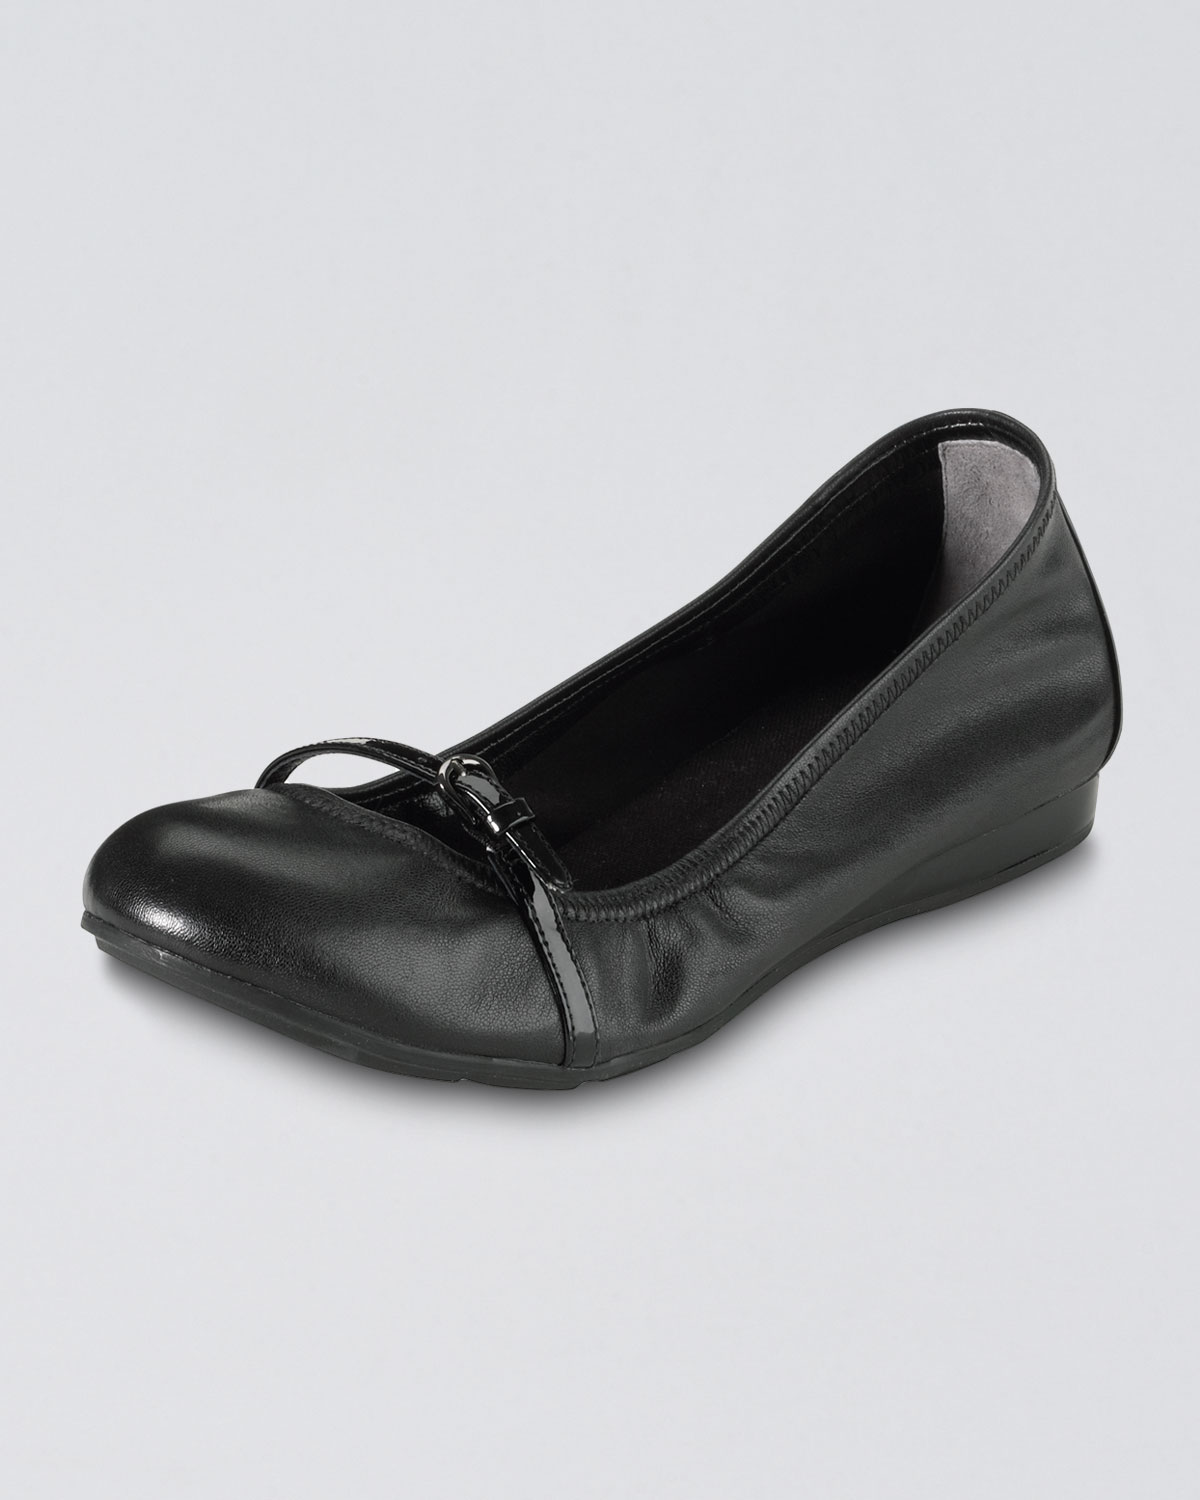 Lyst - Cole Haan Air Tali Mary Jane Flat in Black